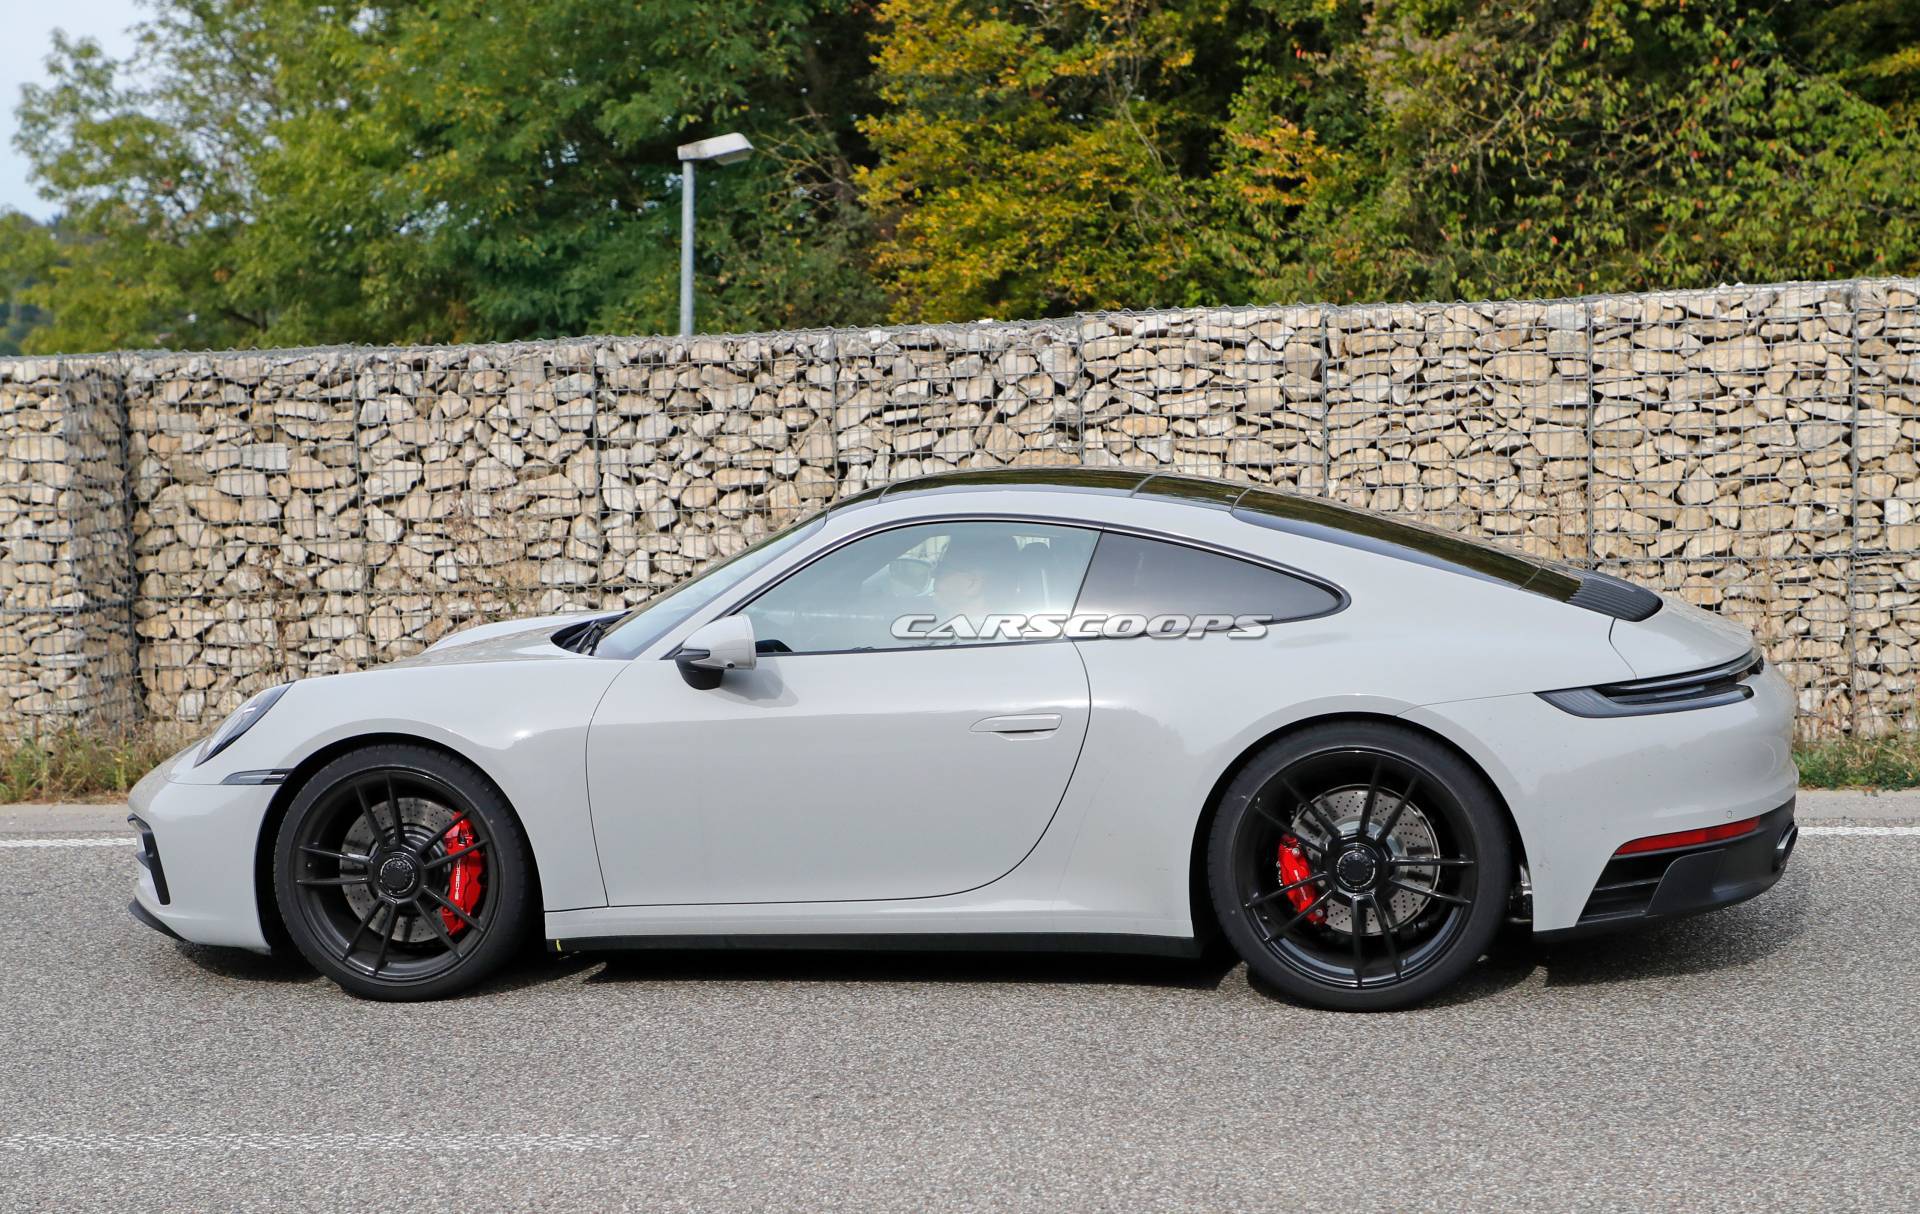 New Porsche 911 Gts Spotted Undisguised Again Should Be The 992 To